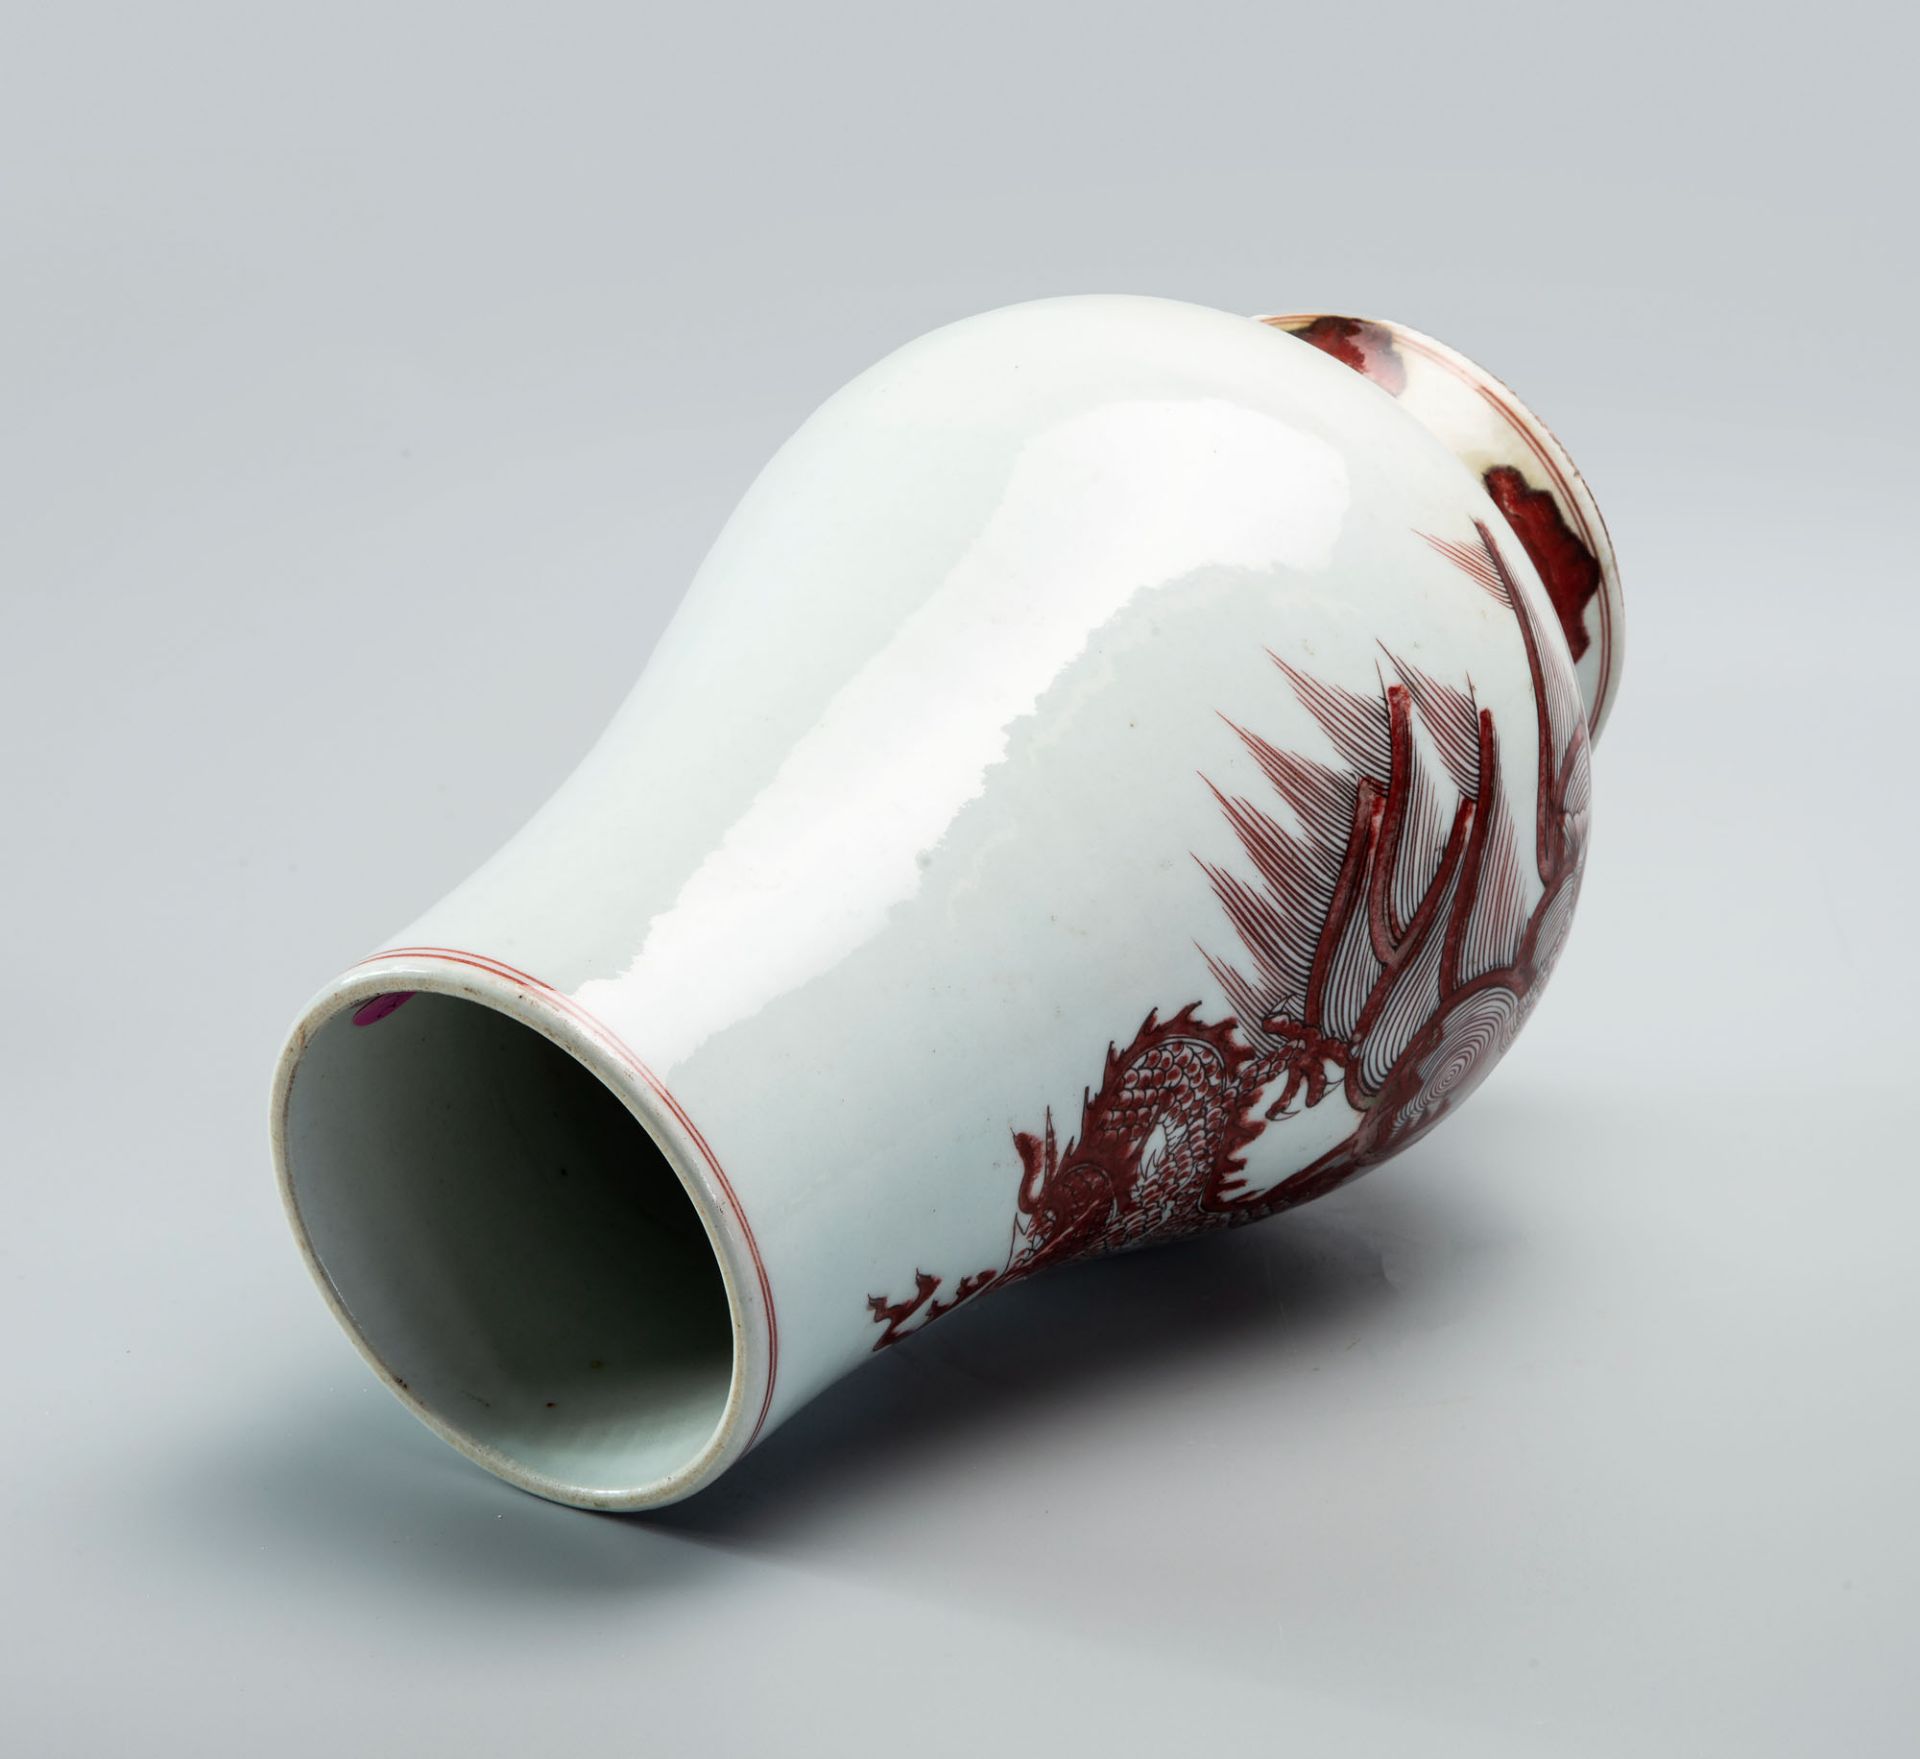 A Fine White and Copper Red Chinese Porcelain Vase, China, Qing Dynasty Kangxi mark - Image 4 of 4